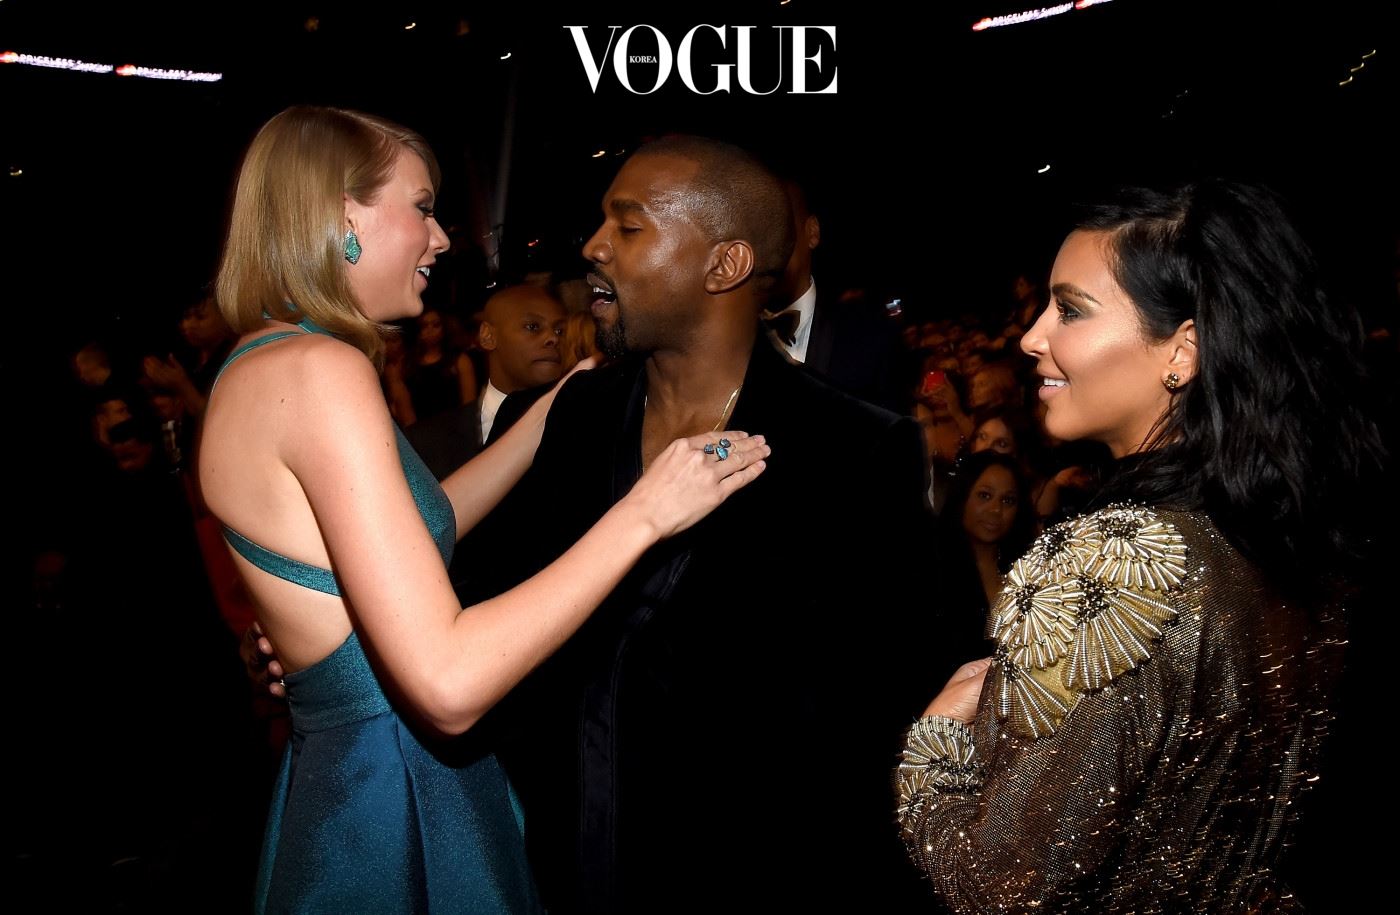 LOS ANGELES, CA - FEBRUARY 08:  (L-R) Recording Artists Taylor Swift, Kanye West and tv personality Kim Kardashian attend The 57th Annual GRAMMY Awards at the STAPLES Center on February 8, 2015 in Los Angeles, California.  (Photo by Larry Busacca/Getty Images for NARAS)